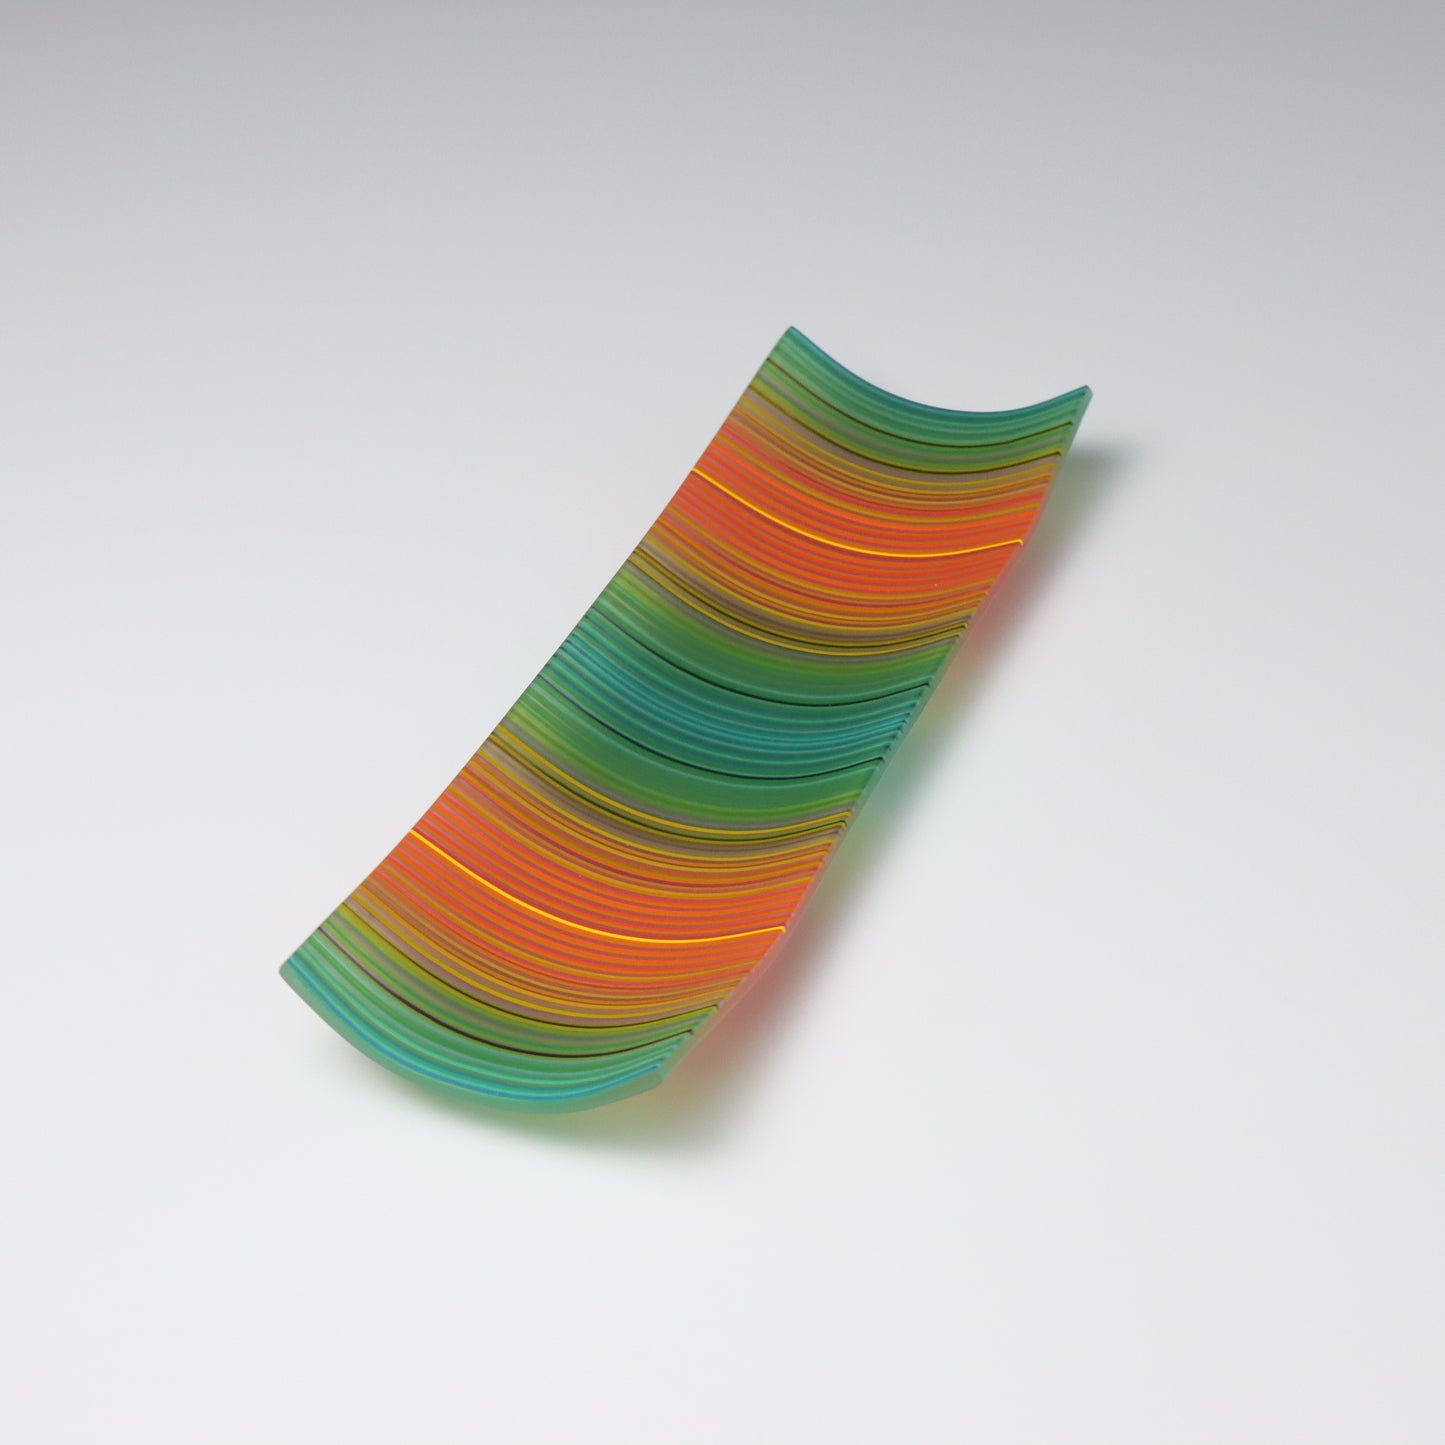 S2135 | Rectangular Shaped ColourWave Glass Plate | Teal Green and Orange